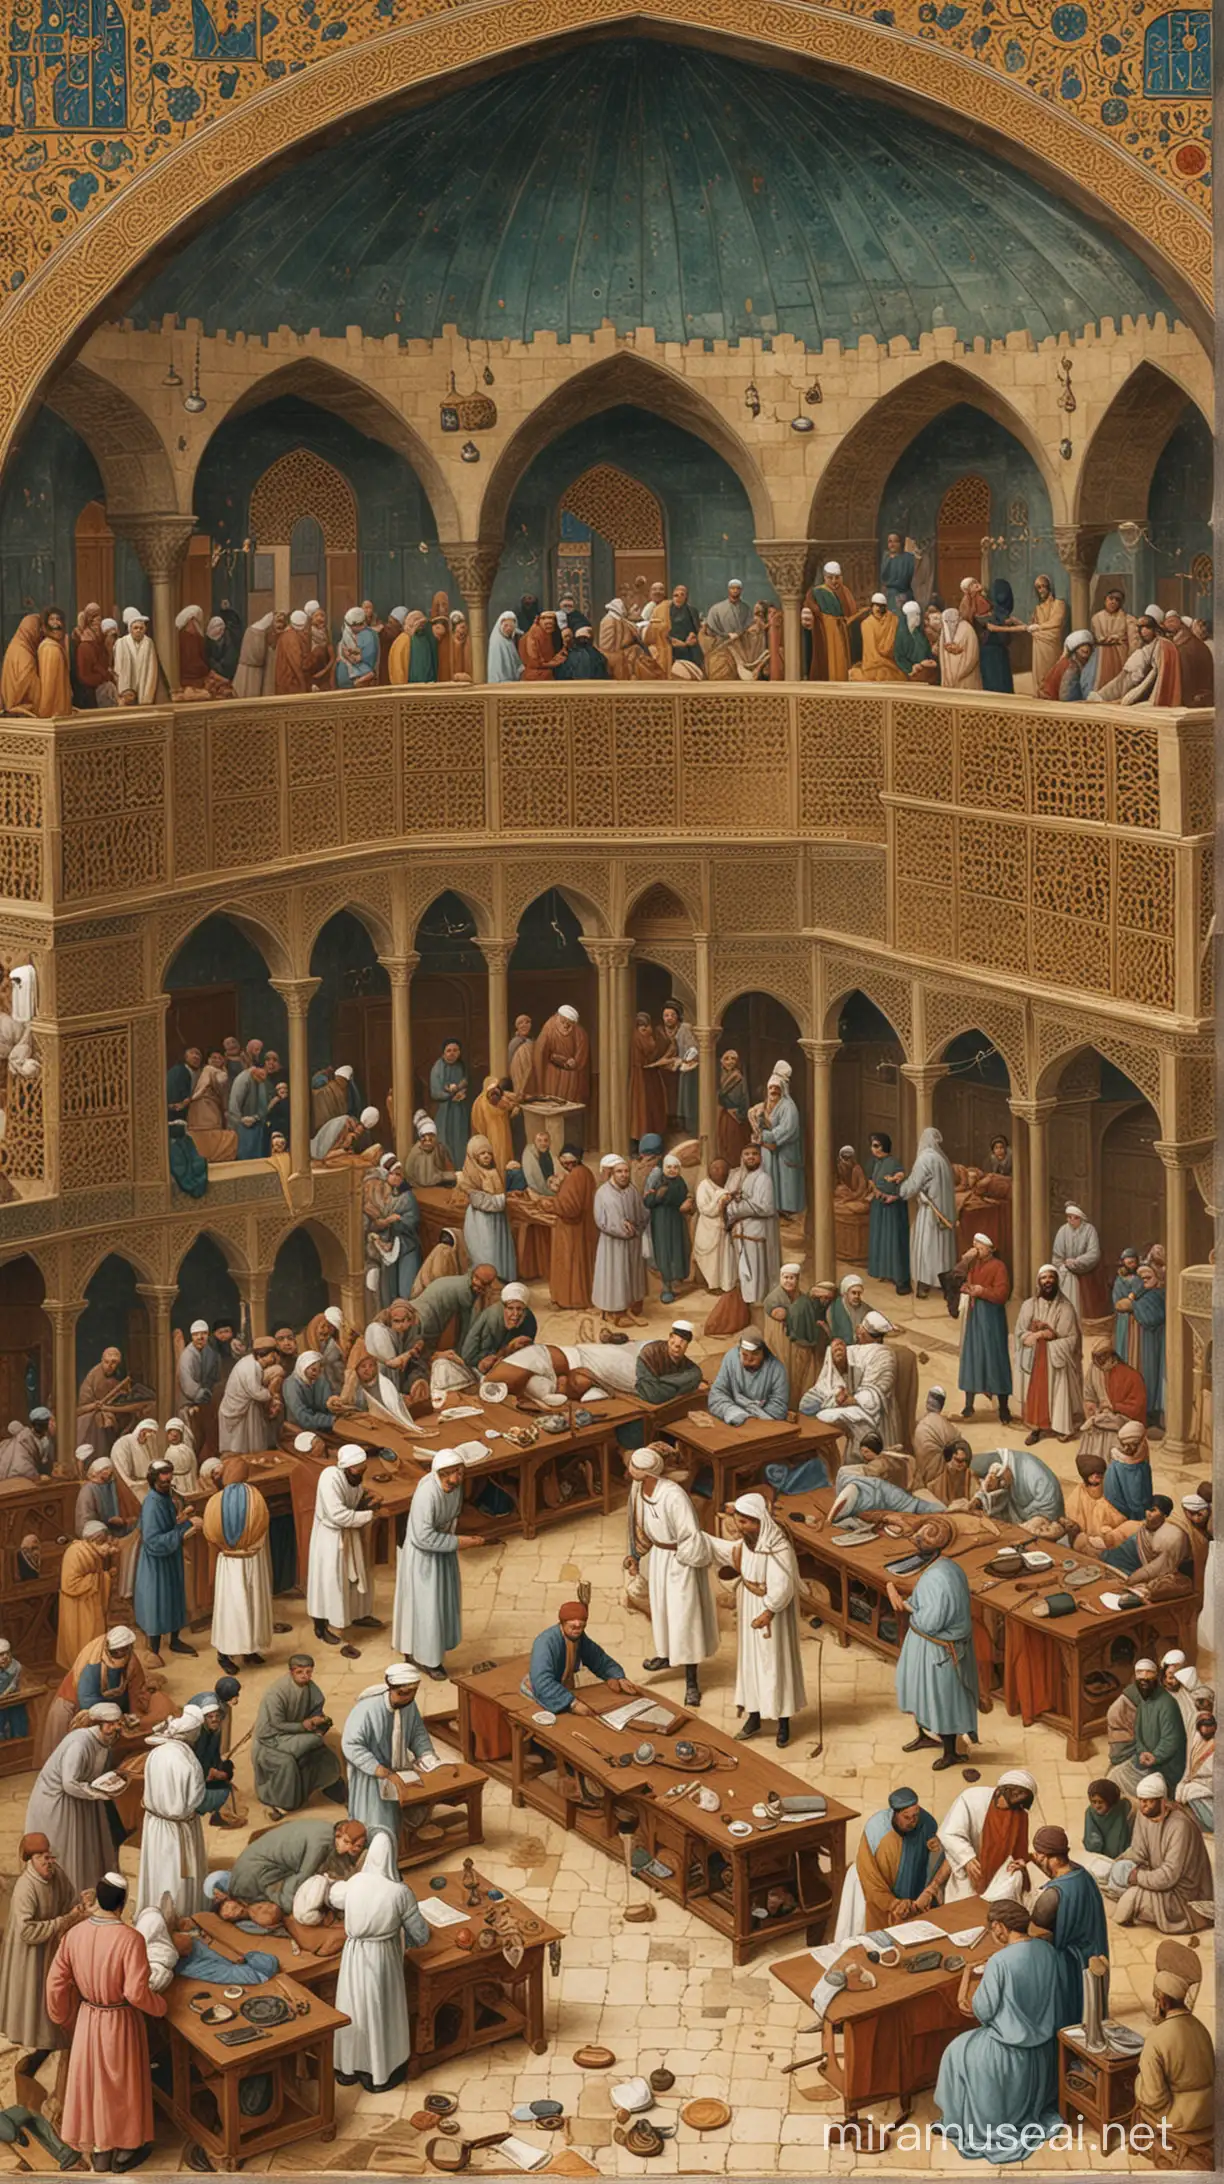 Illustration of Islamic Hospital Pioneering Medicine in the Golden Age